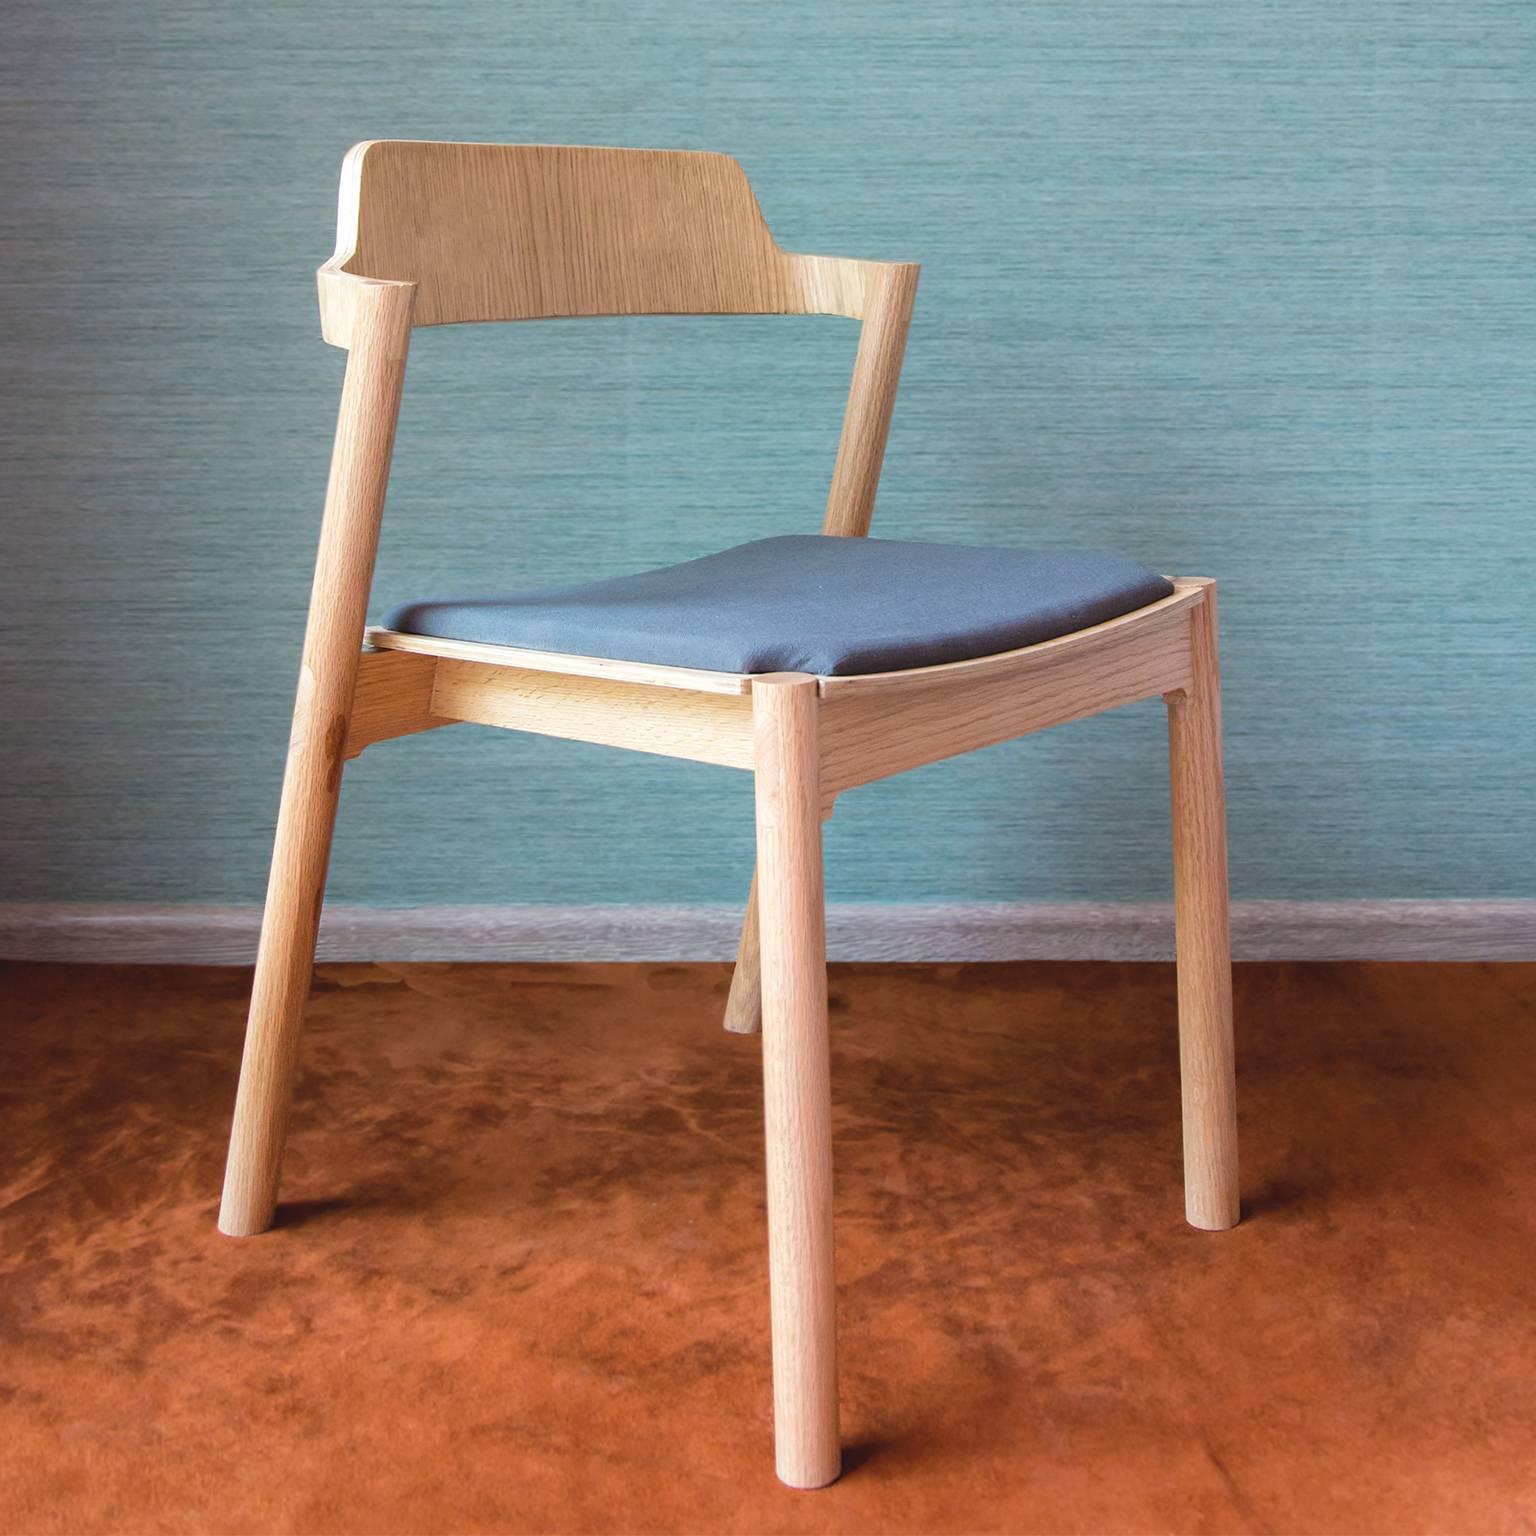 Influenced by Denmark’s love of materials and well-crafted design, Jonah Willcox-Healey developed a stackable chair that emphasizes both the materials and the way it is constructed. The Nora chair quietly stacks on top of each other, and welcomes